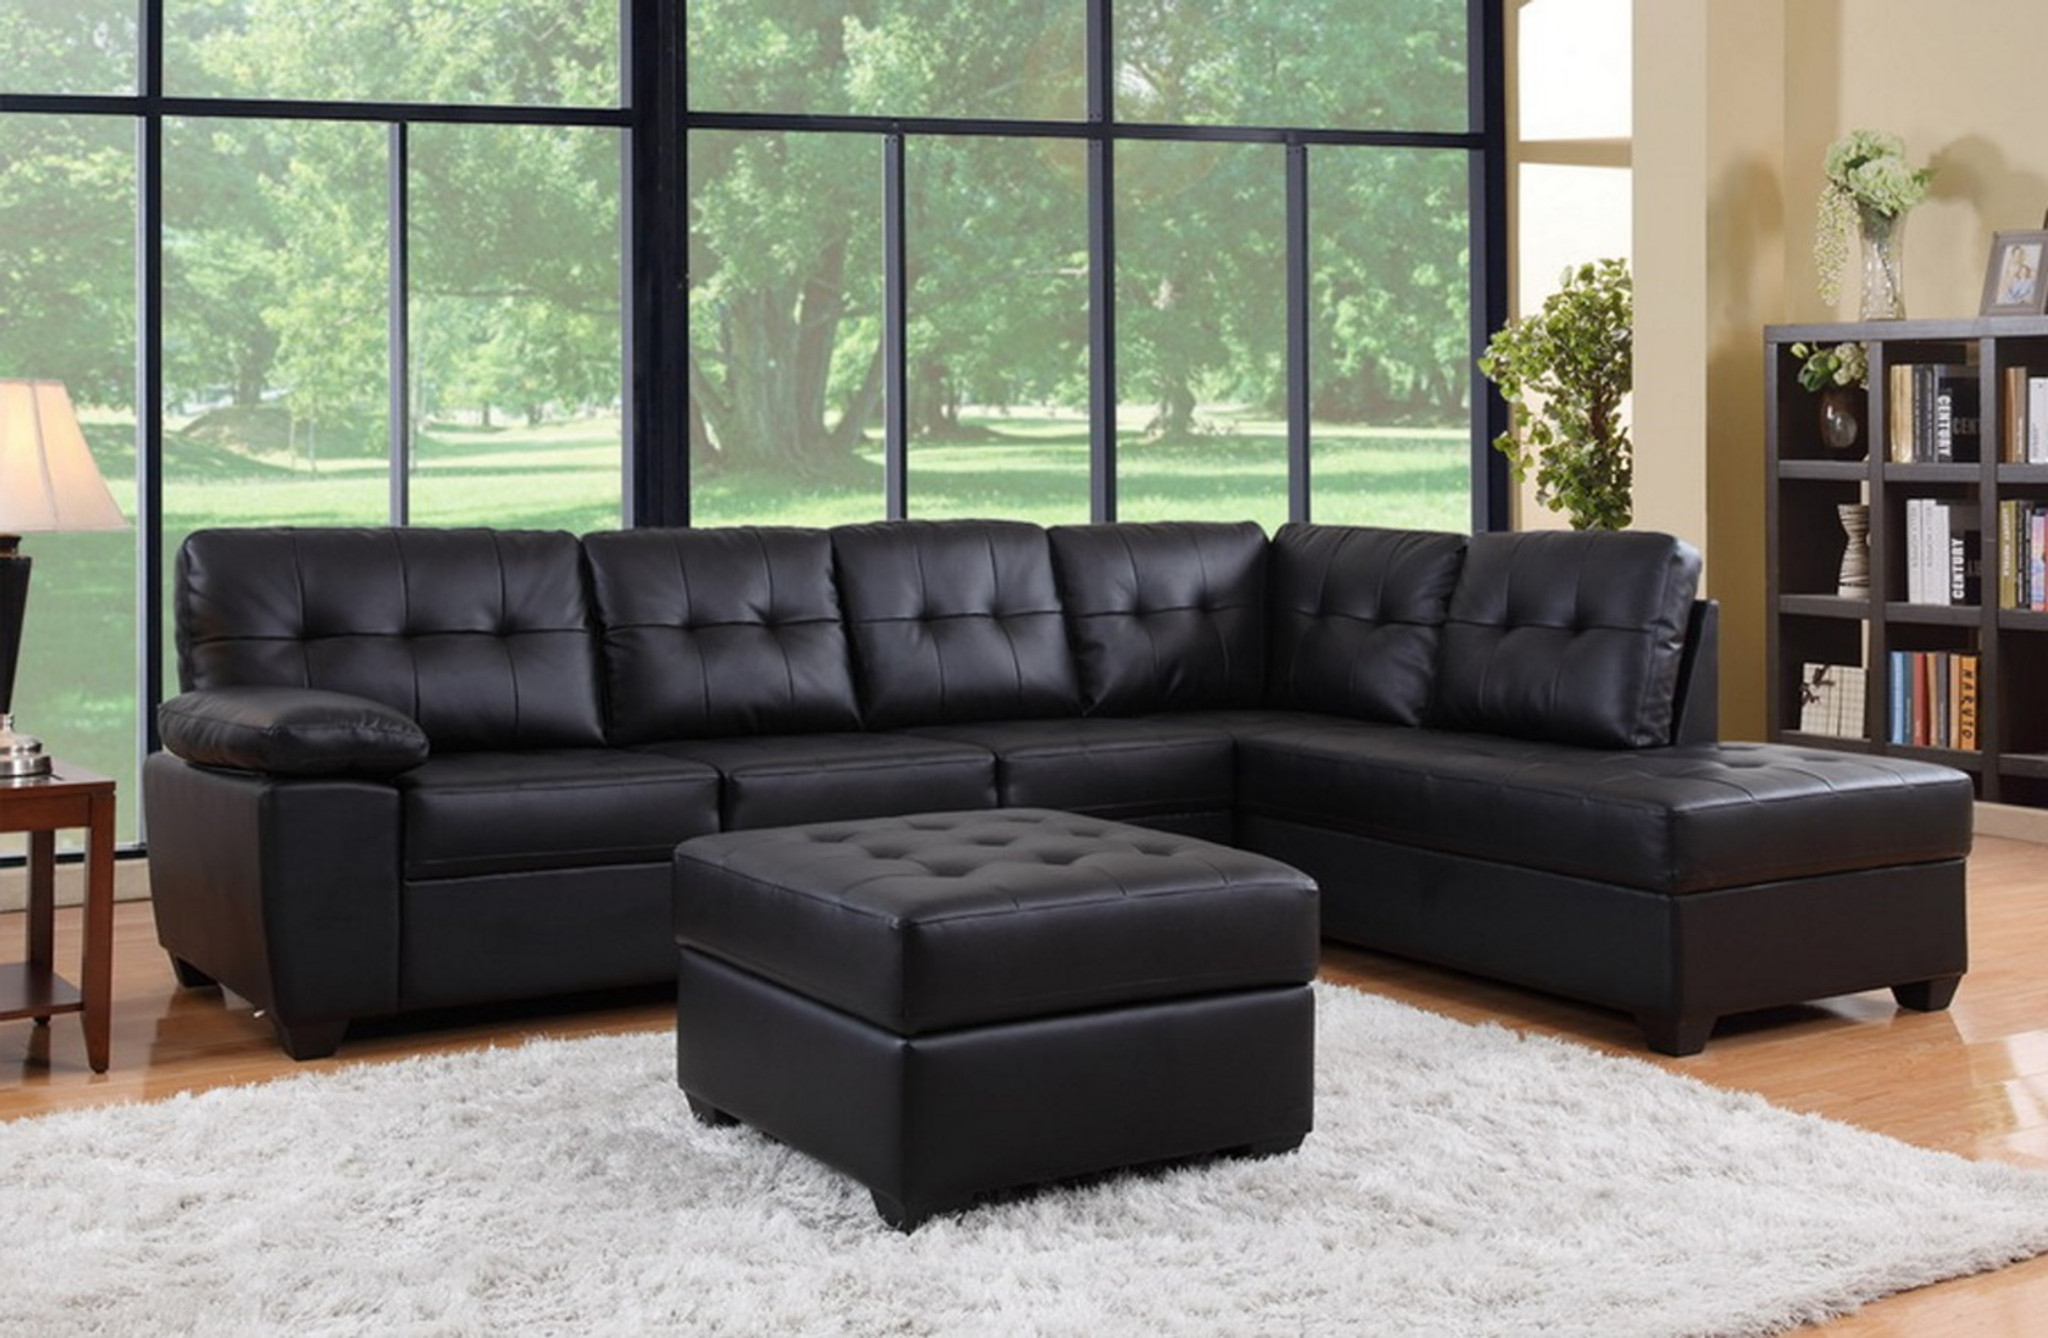 Reveal 69+ Stunning decorate living room black leather sectional Satisfy Your Imagination